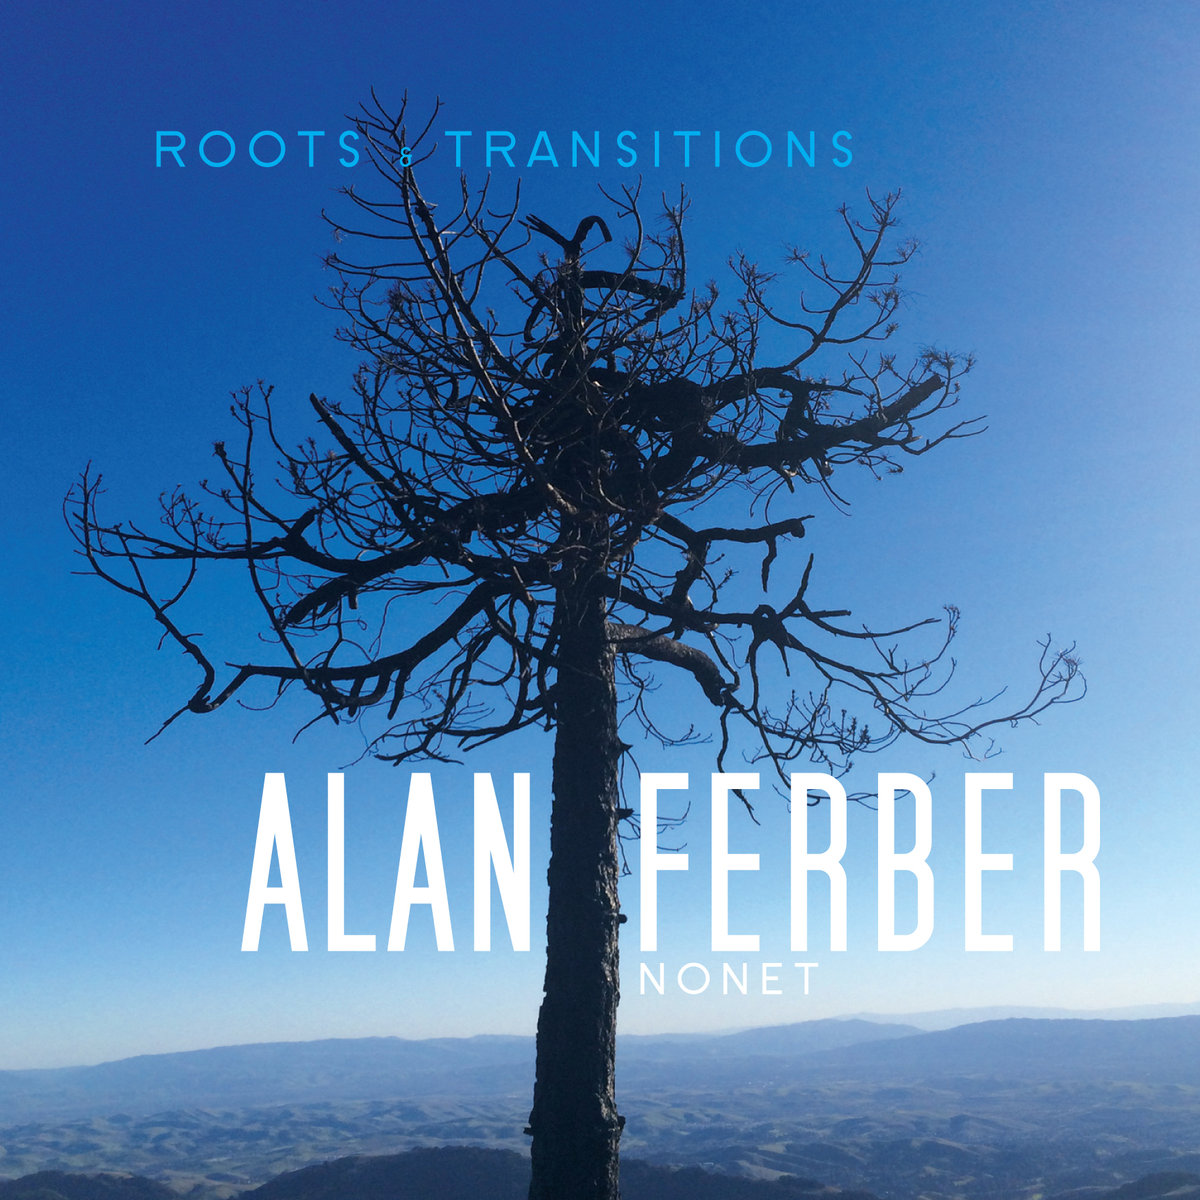 ALAN FERBER - Roots & Transitions cover 